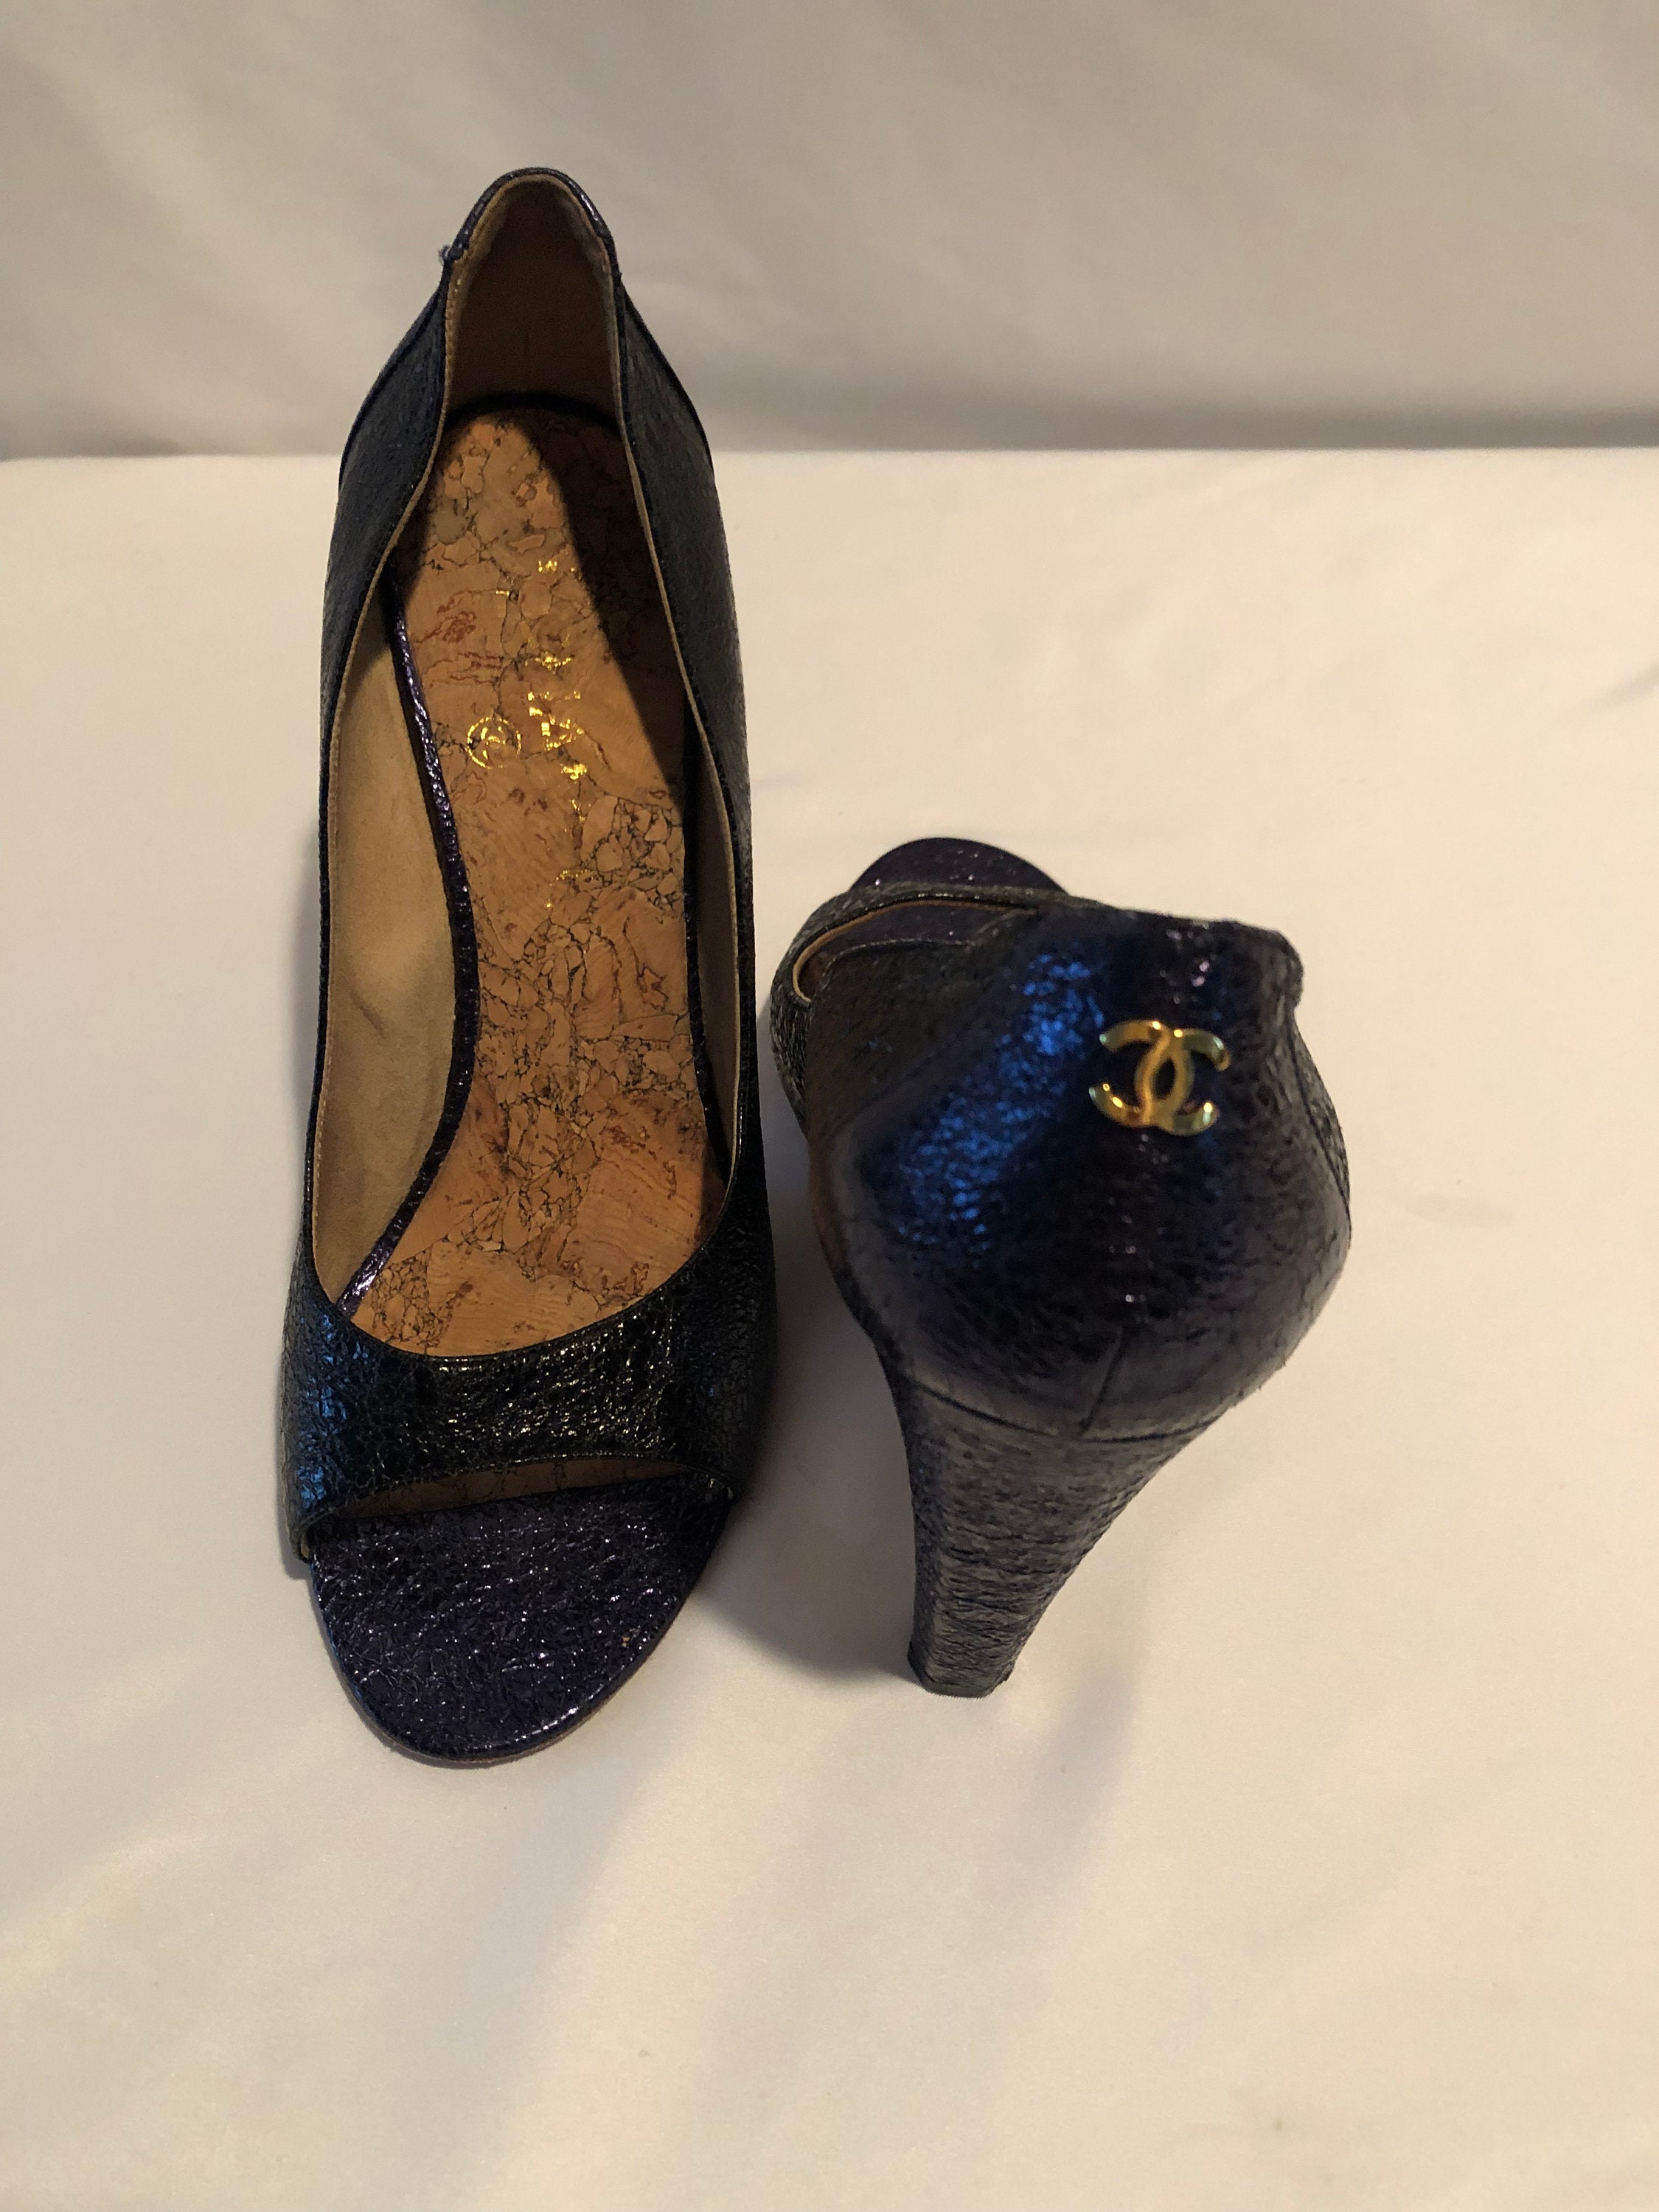 Chanel Kitten Heel Shoes Pointed Pumps Size 36 1/2 Two Tones Black Leather  and Patent Vintage Pumps France Designer Pittsbroc -  Hong Kong